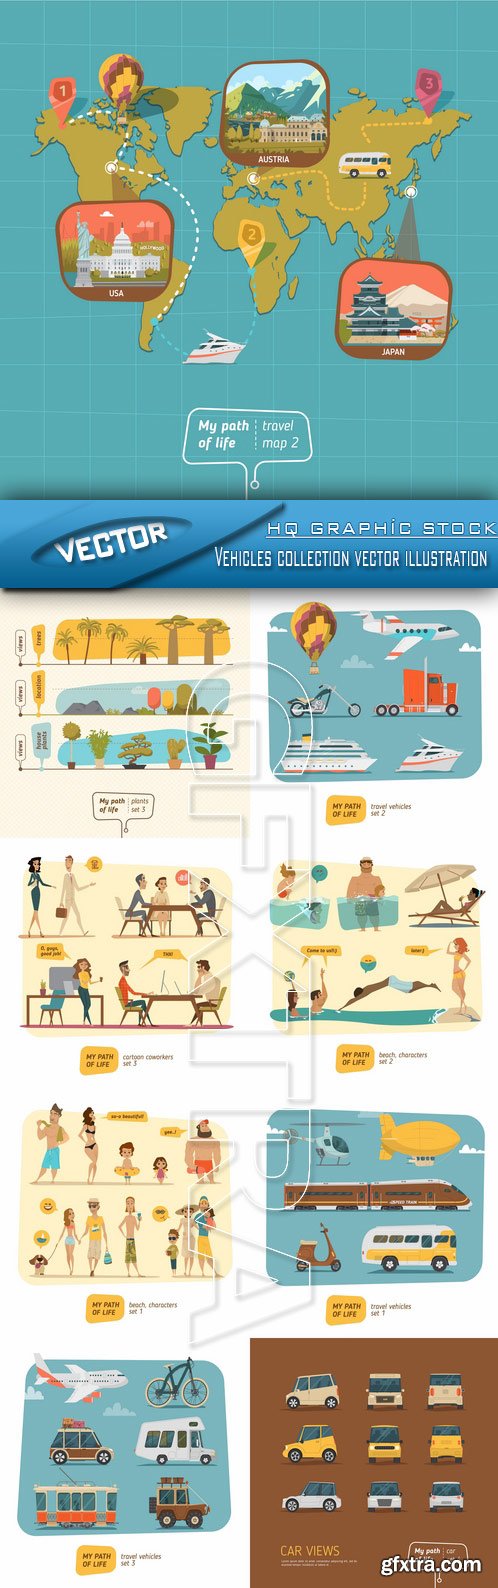 Stock Vector - Vehicles collection vector illustration